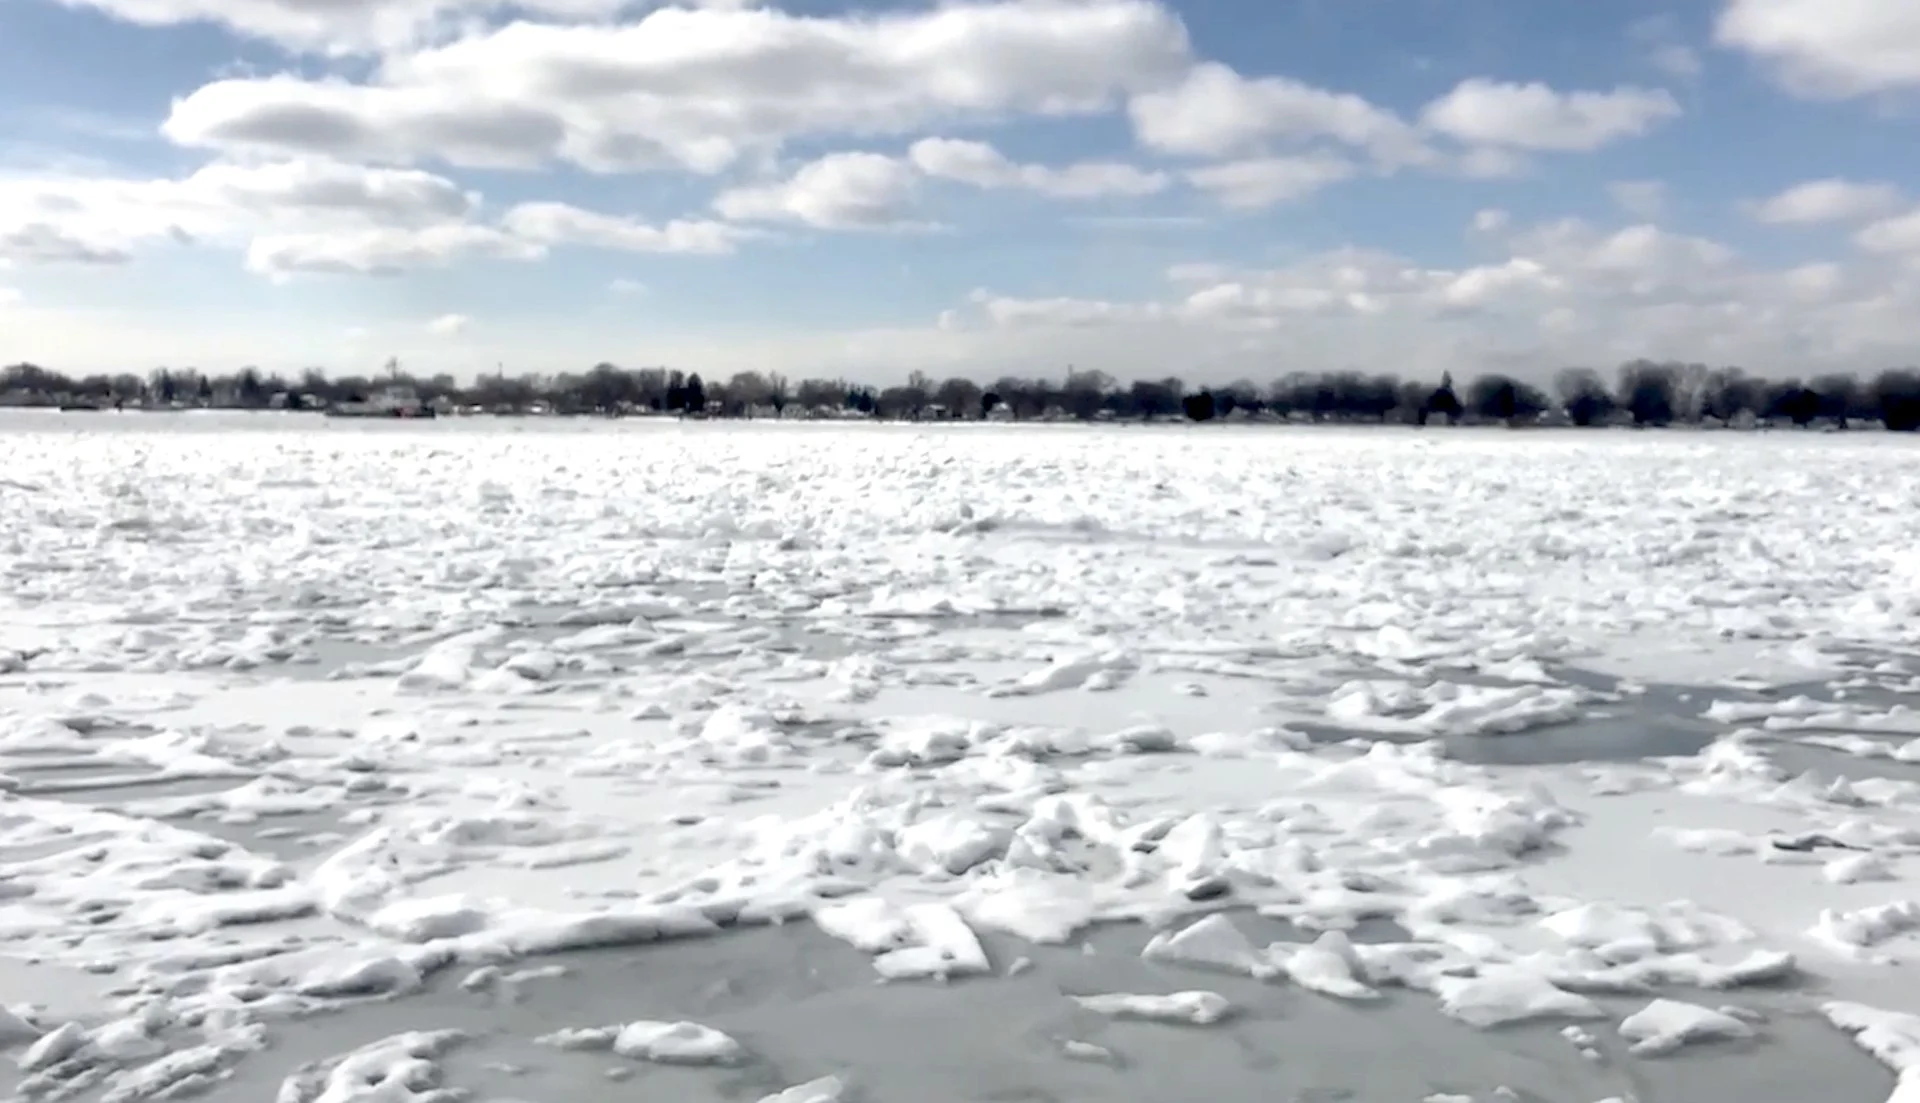 Ice jam poses flood threat for Ontario's St. Clair River communities